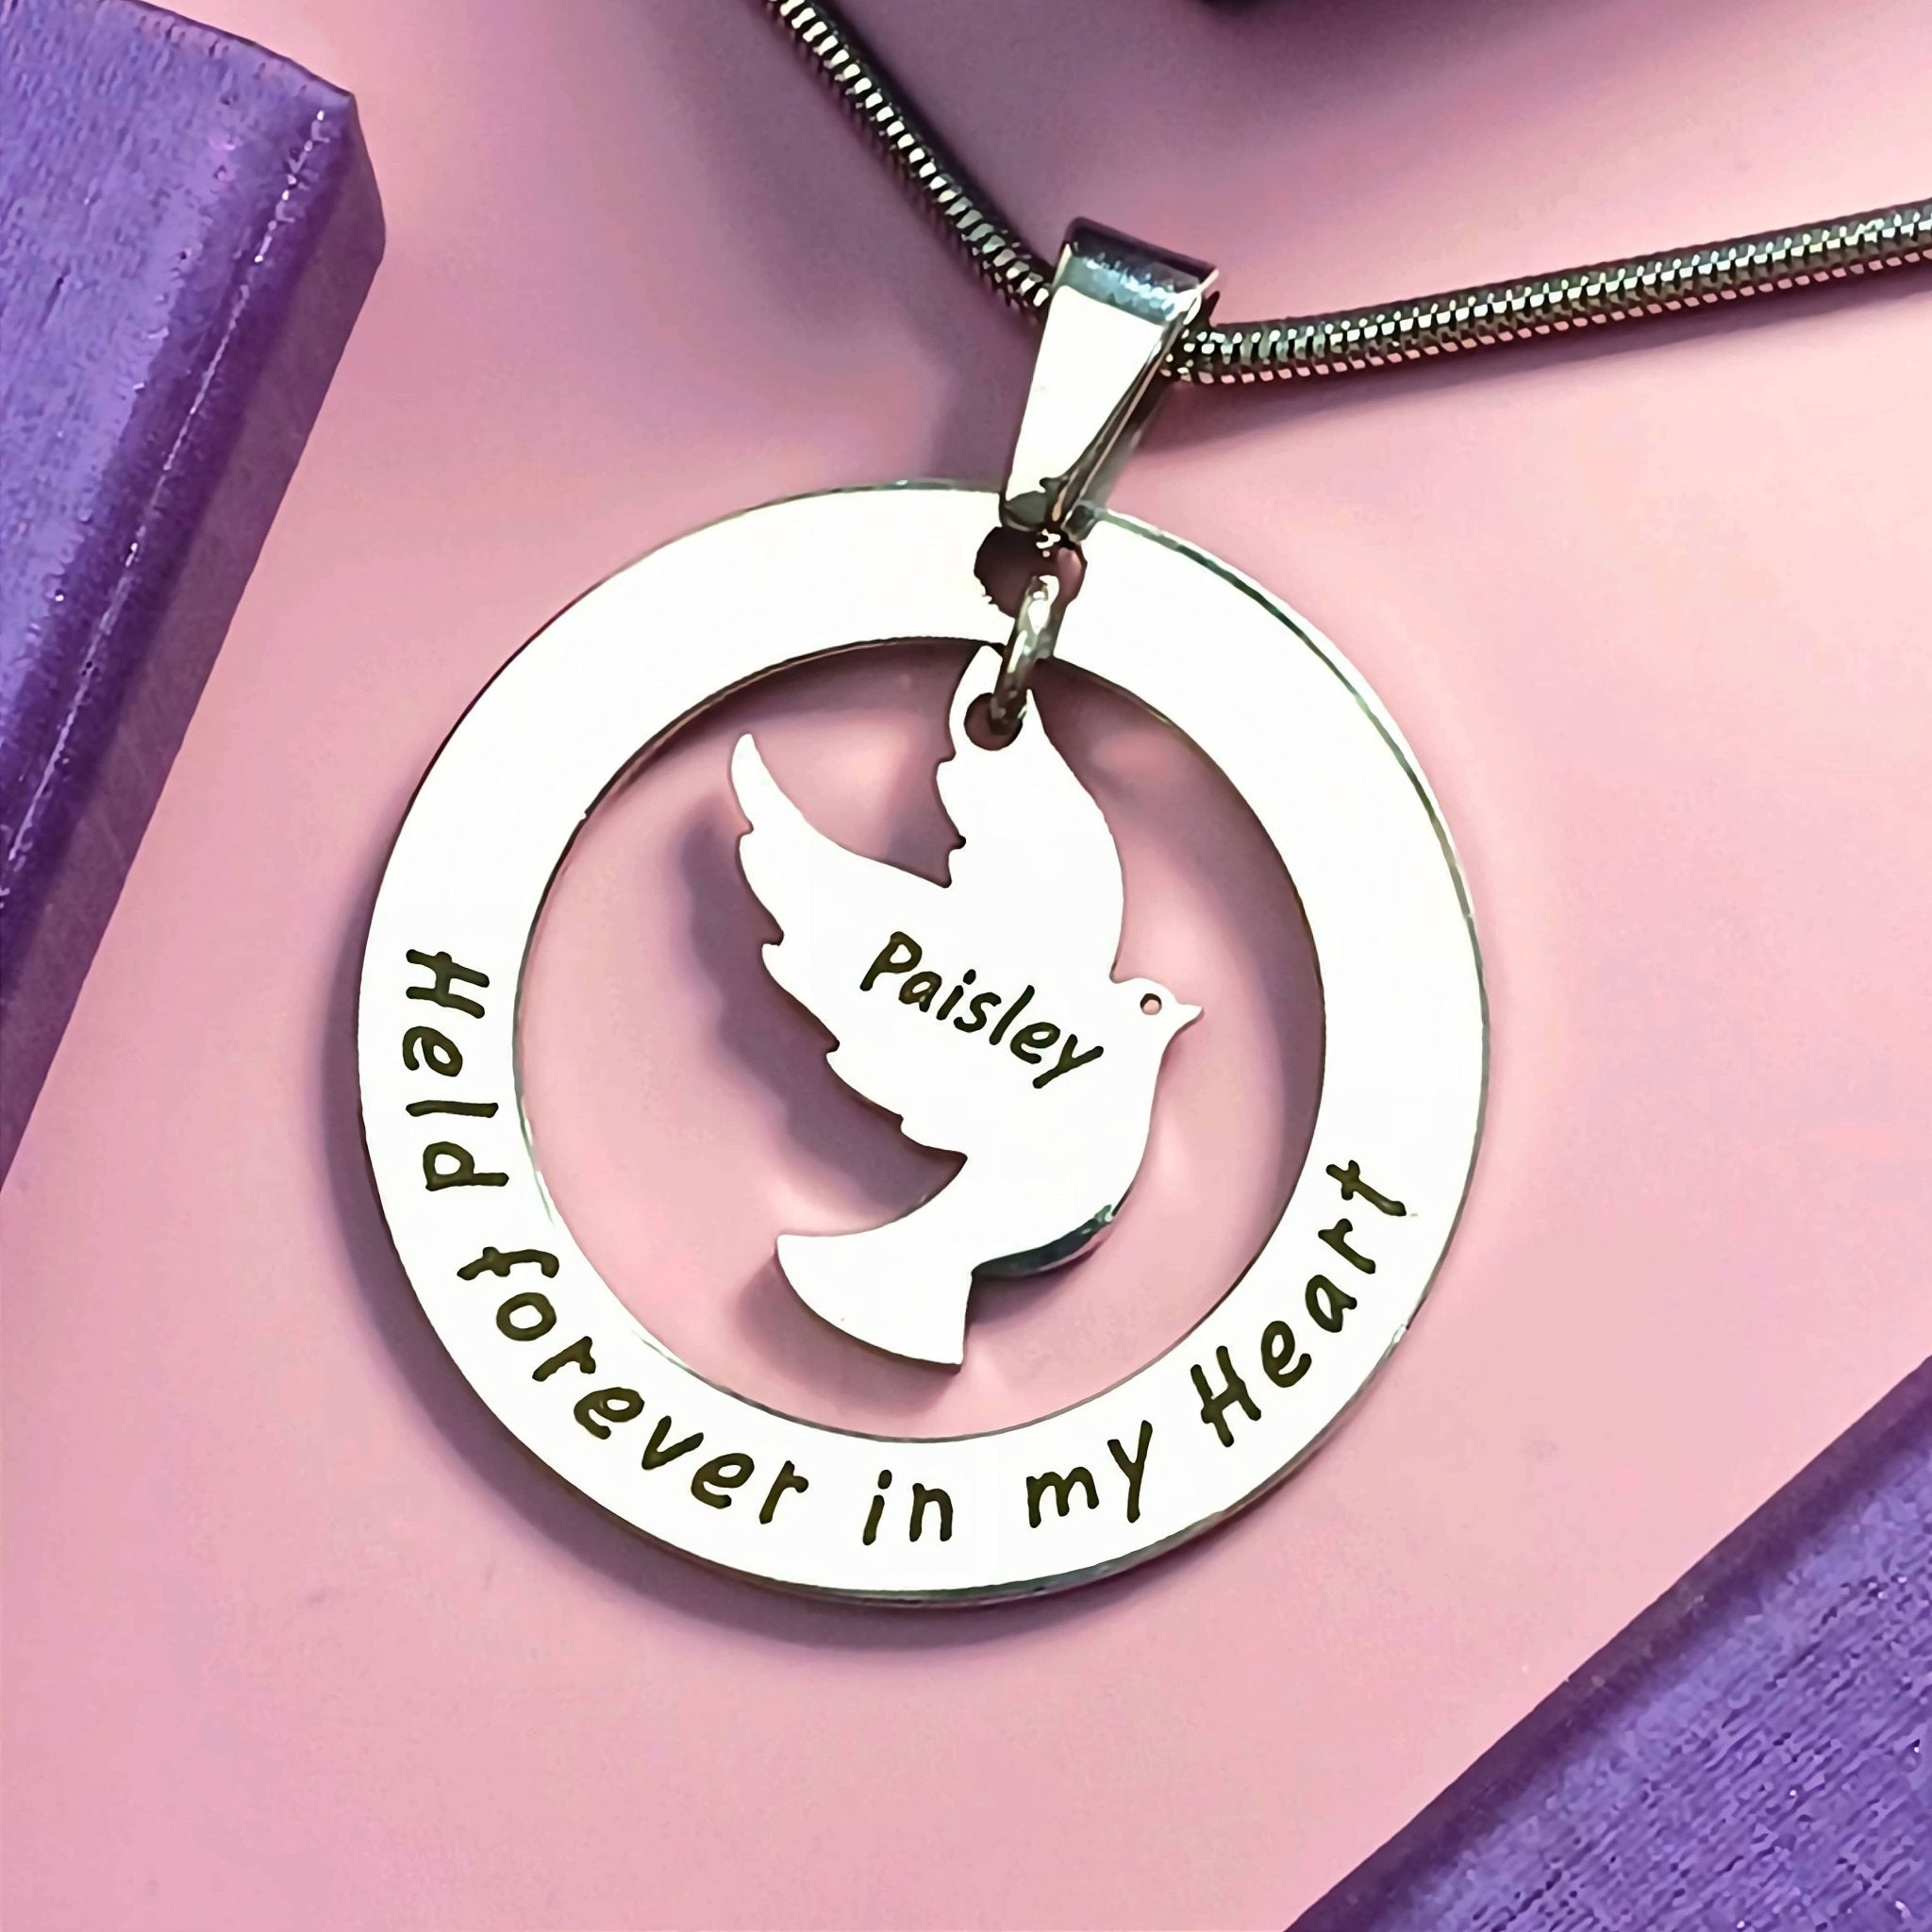 Held Forever Necklace - Memorial & Cremation Jewellery by Belle Fever